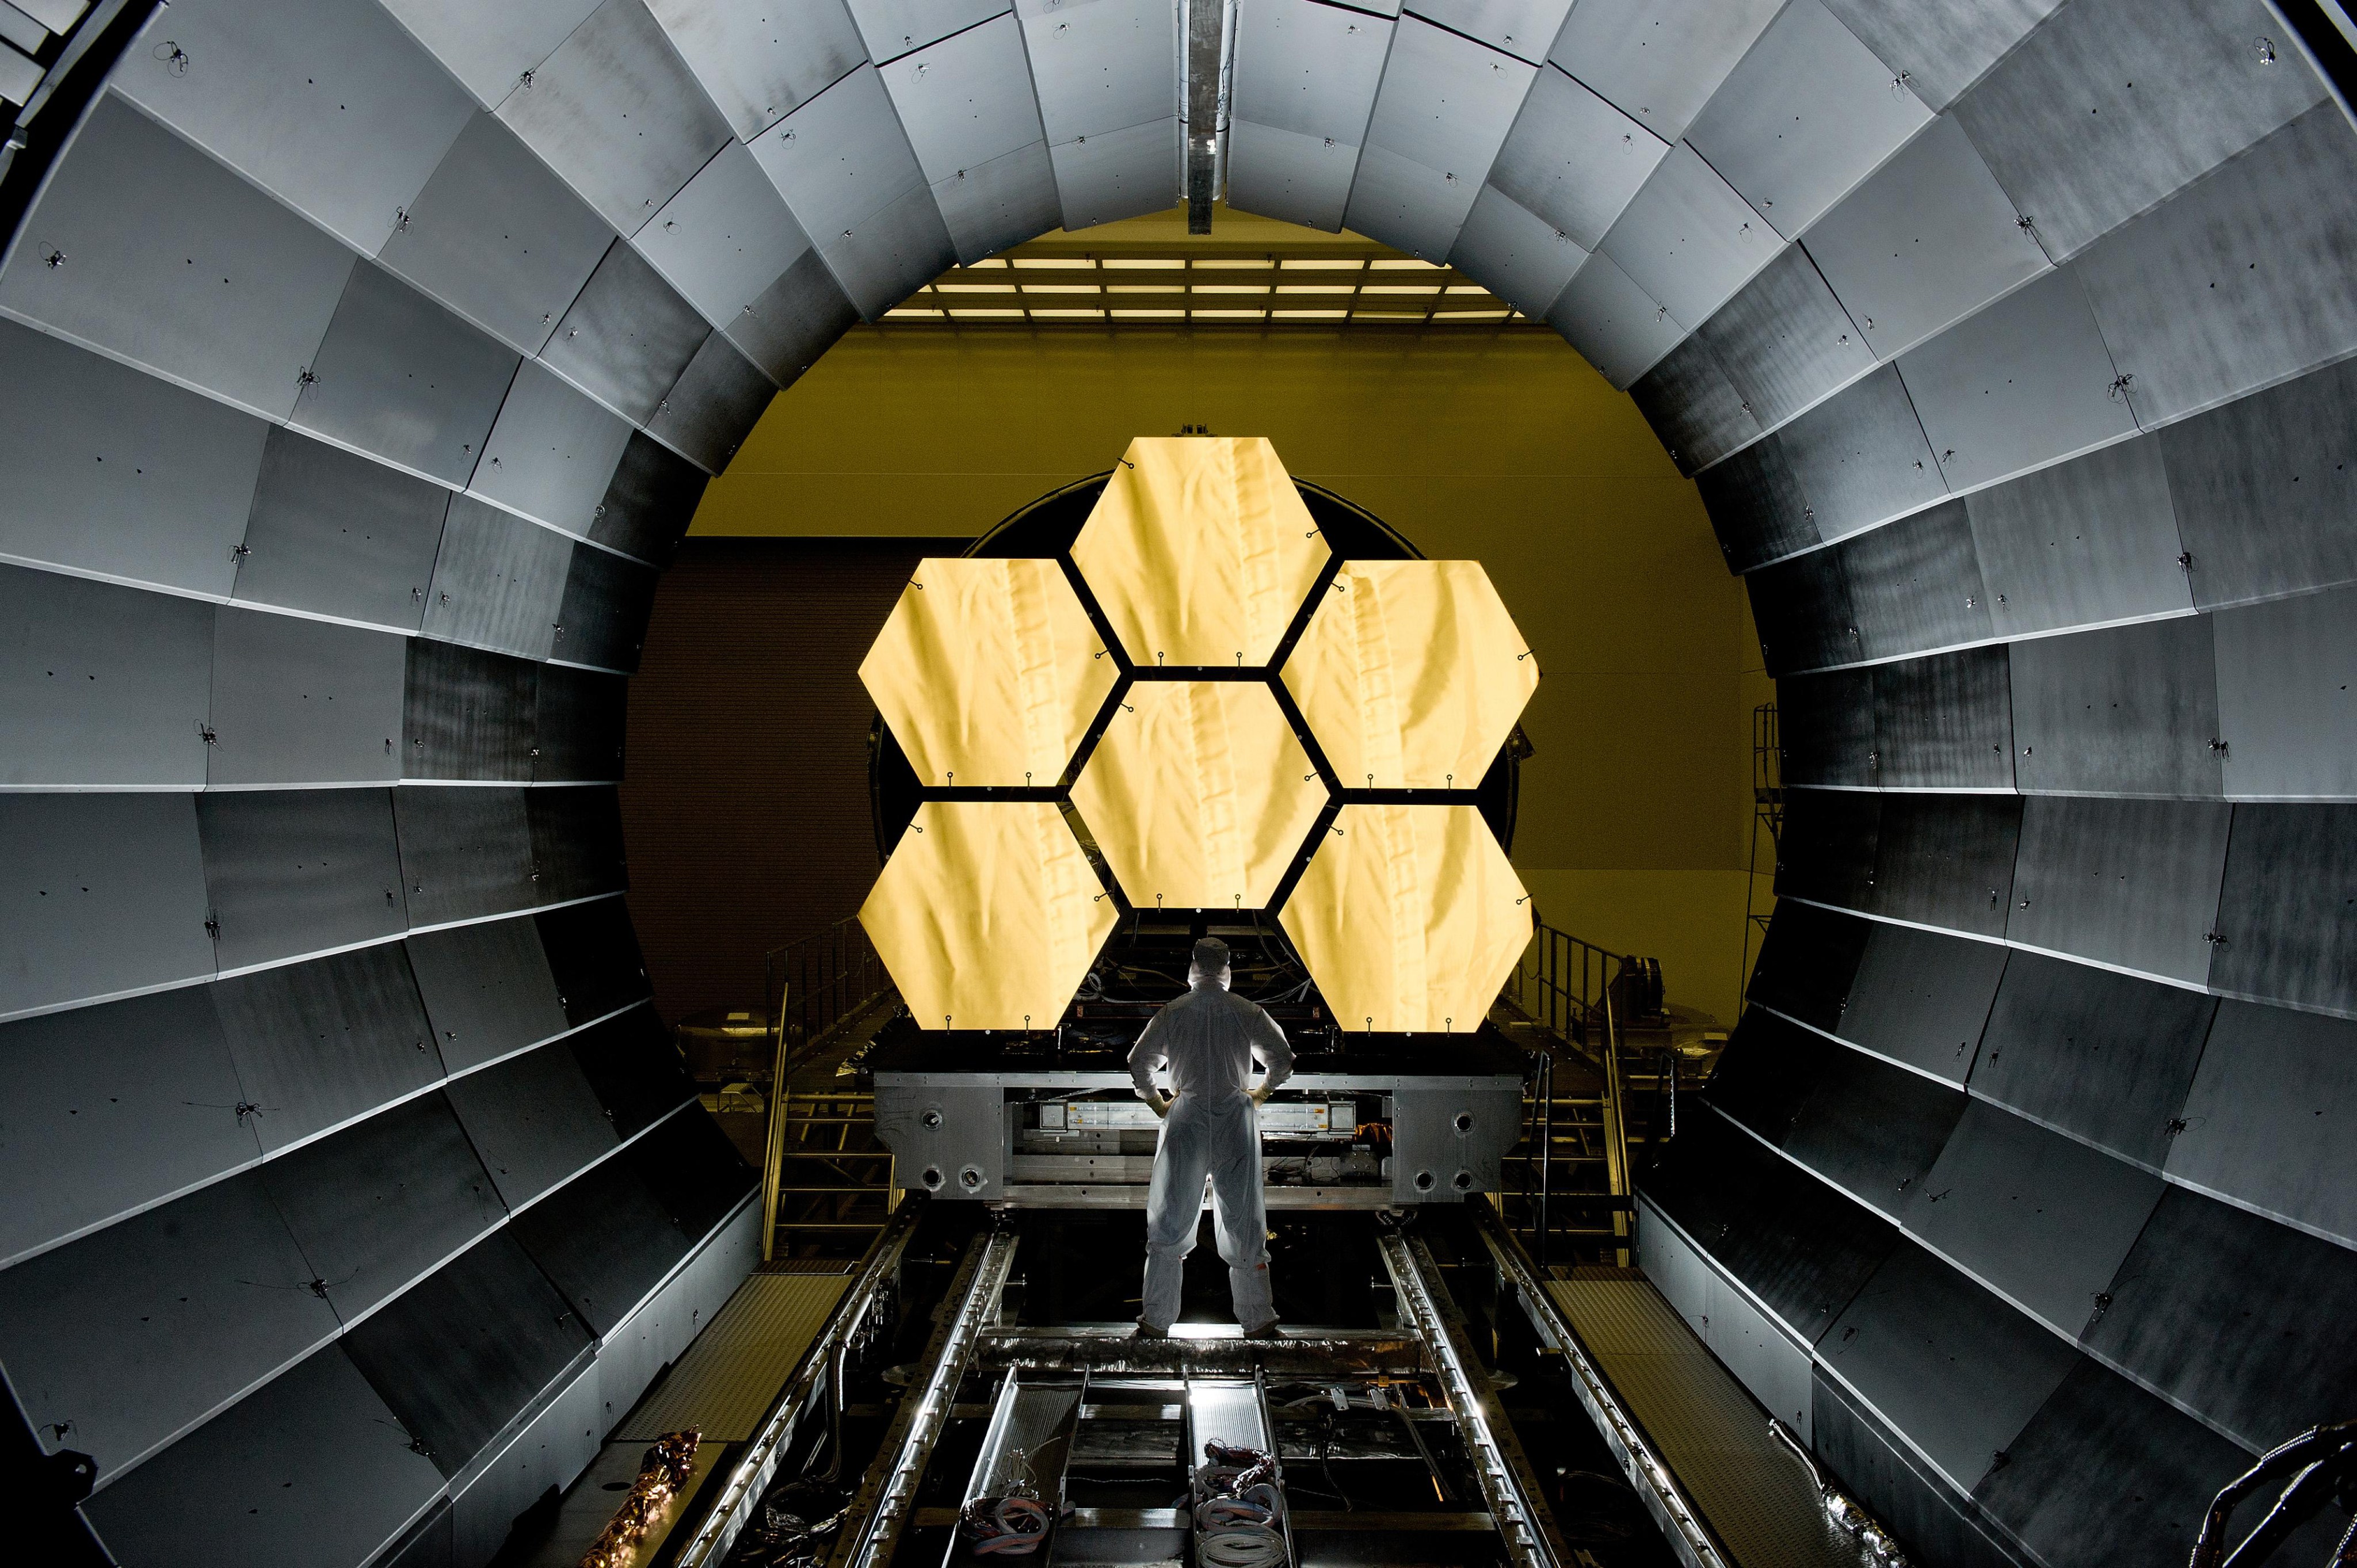 An engineer stands in front of the gold-coated primary mirror EDU